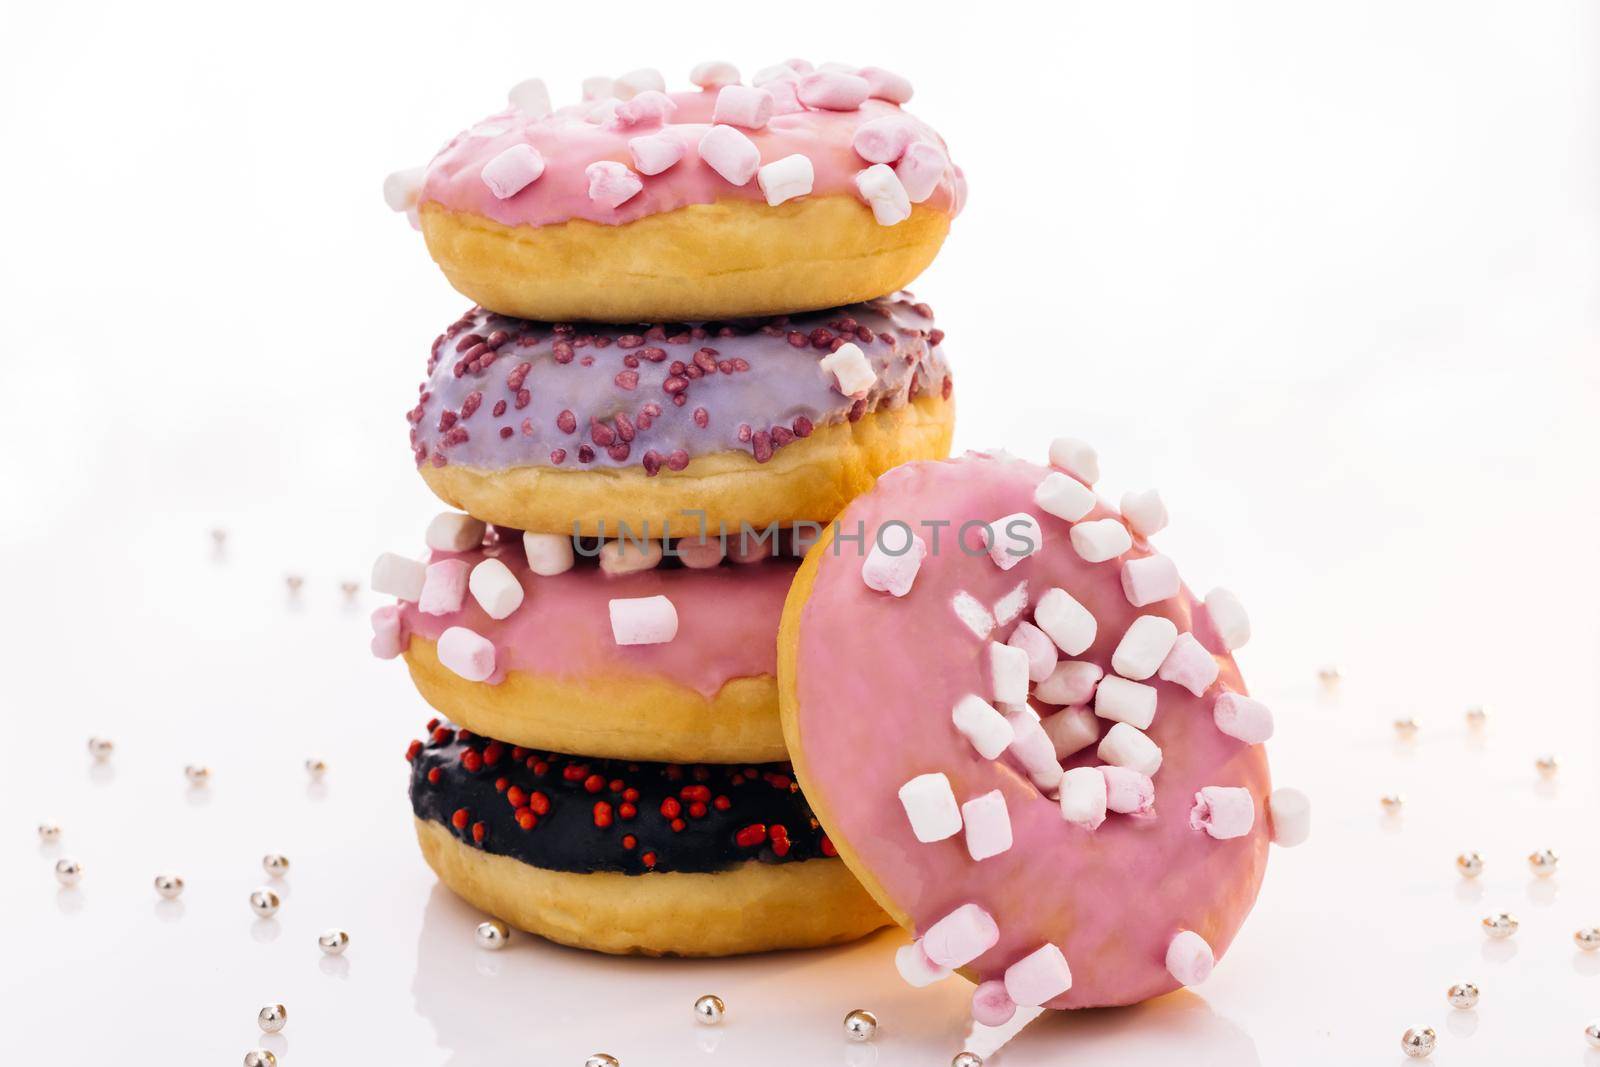 Shot of five sweet doughnuts stacked on top of each other in the form of a tower. Tasty delicious sweet do nut with colorful sprinkles on white background.